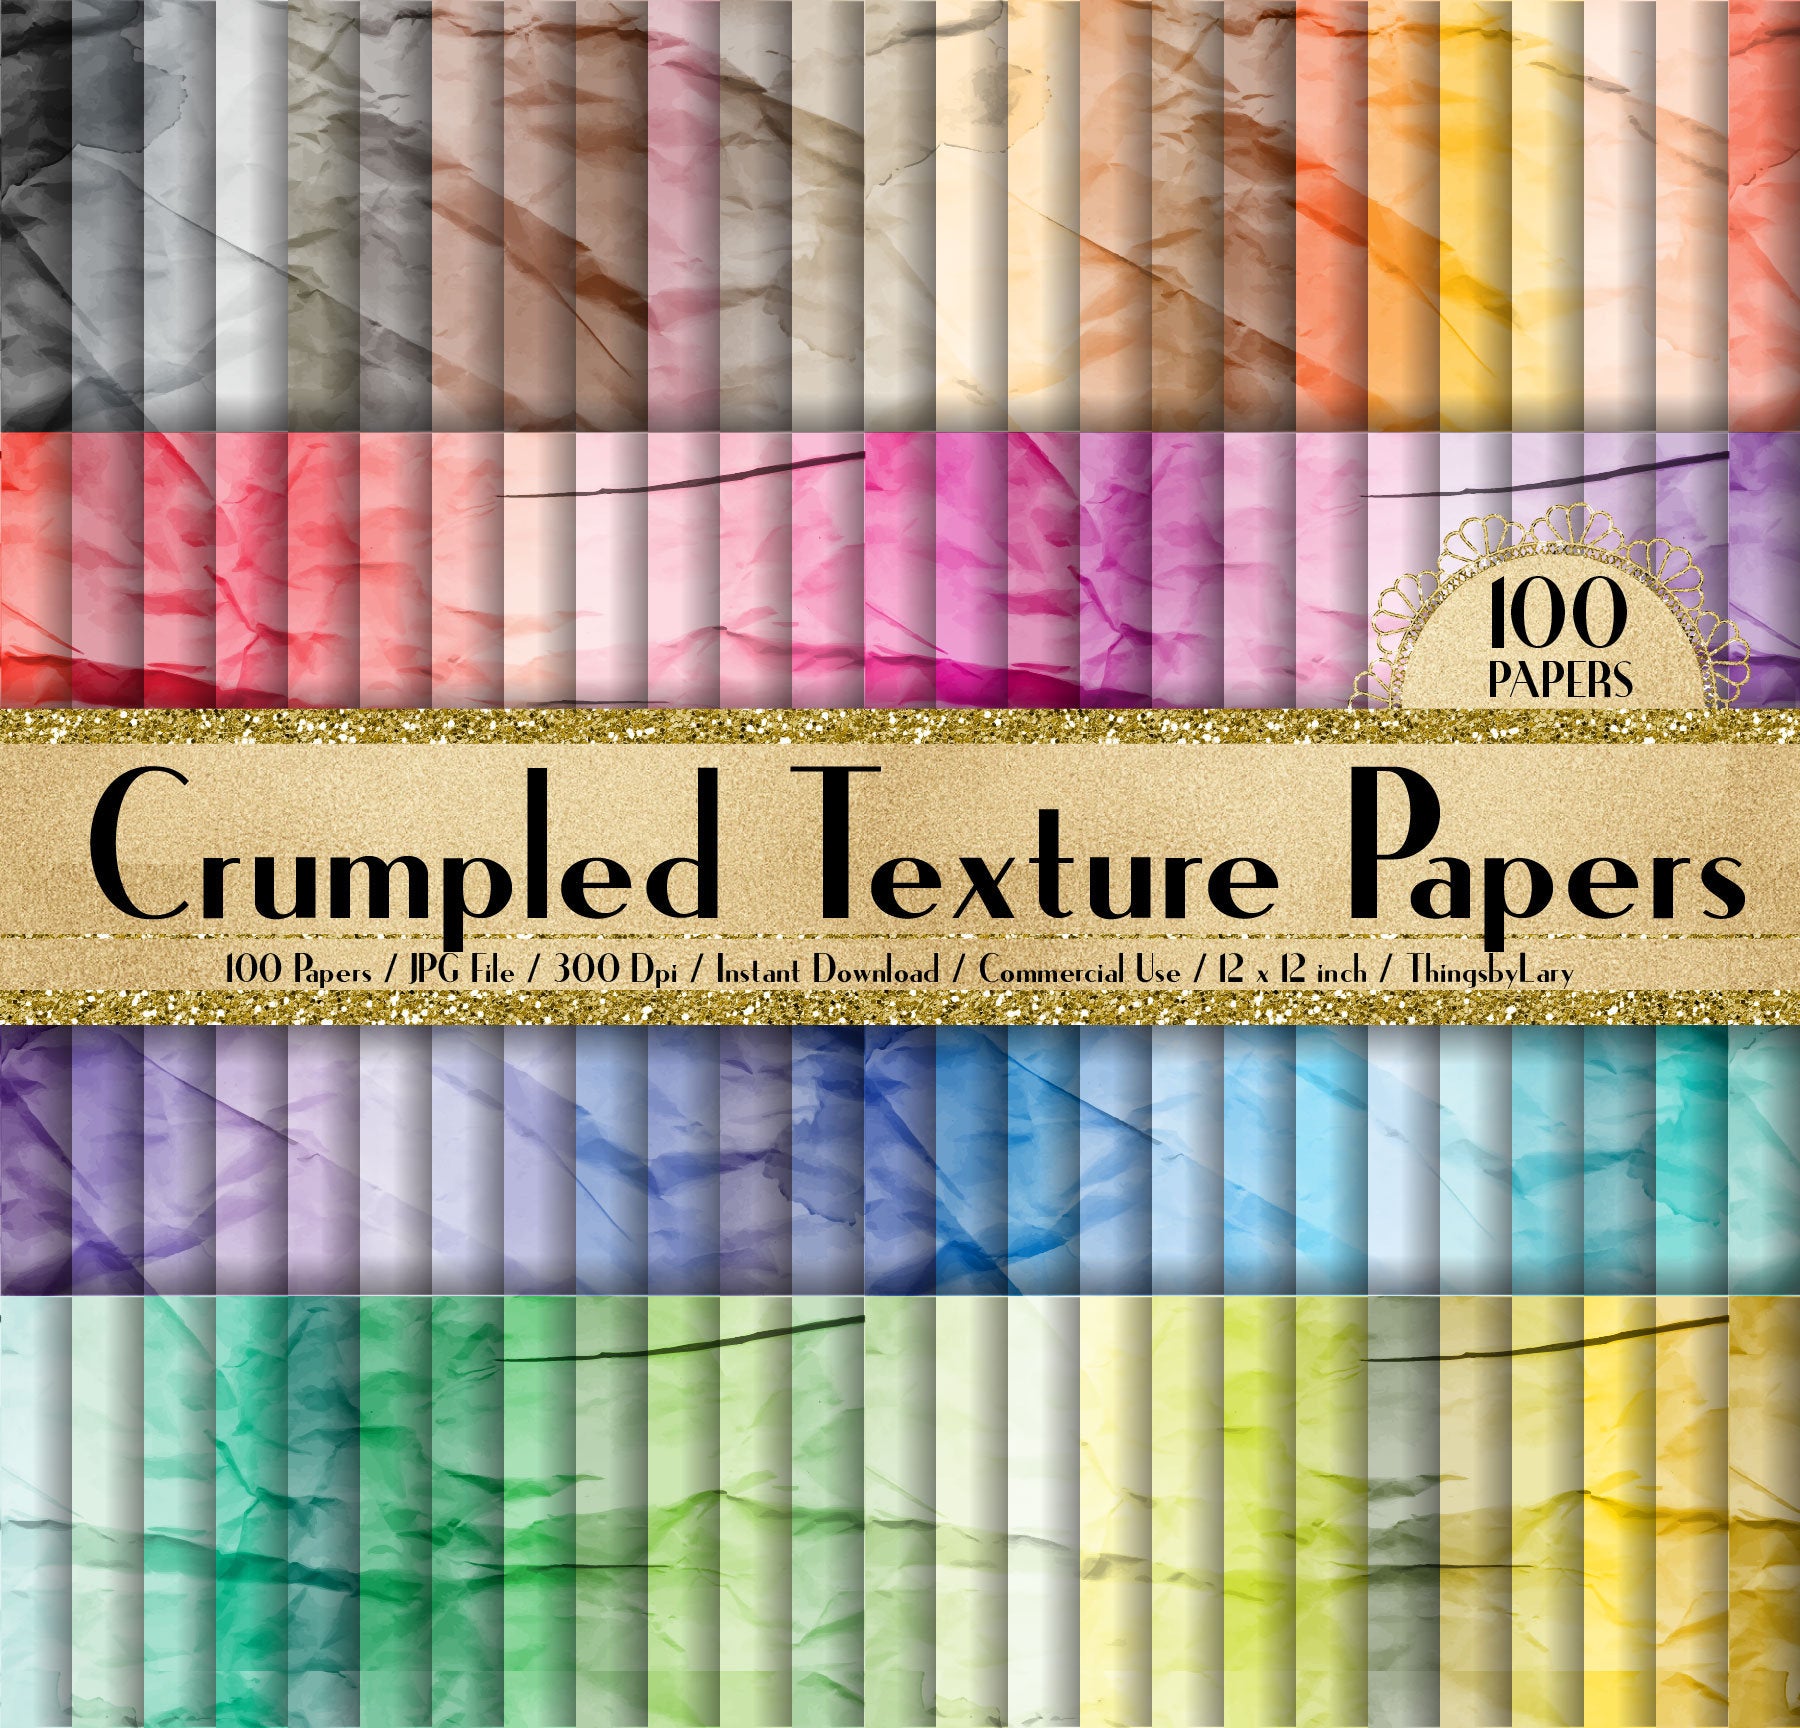 100 Crumpled Texture Papers in 12inch, 300 Dpi Planner Paper, Scrapbook Paper, Paper Kit, Scrapbooking Kit, Digital Crumpled Papers, Folded